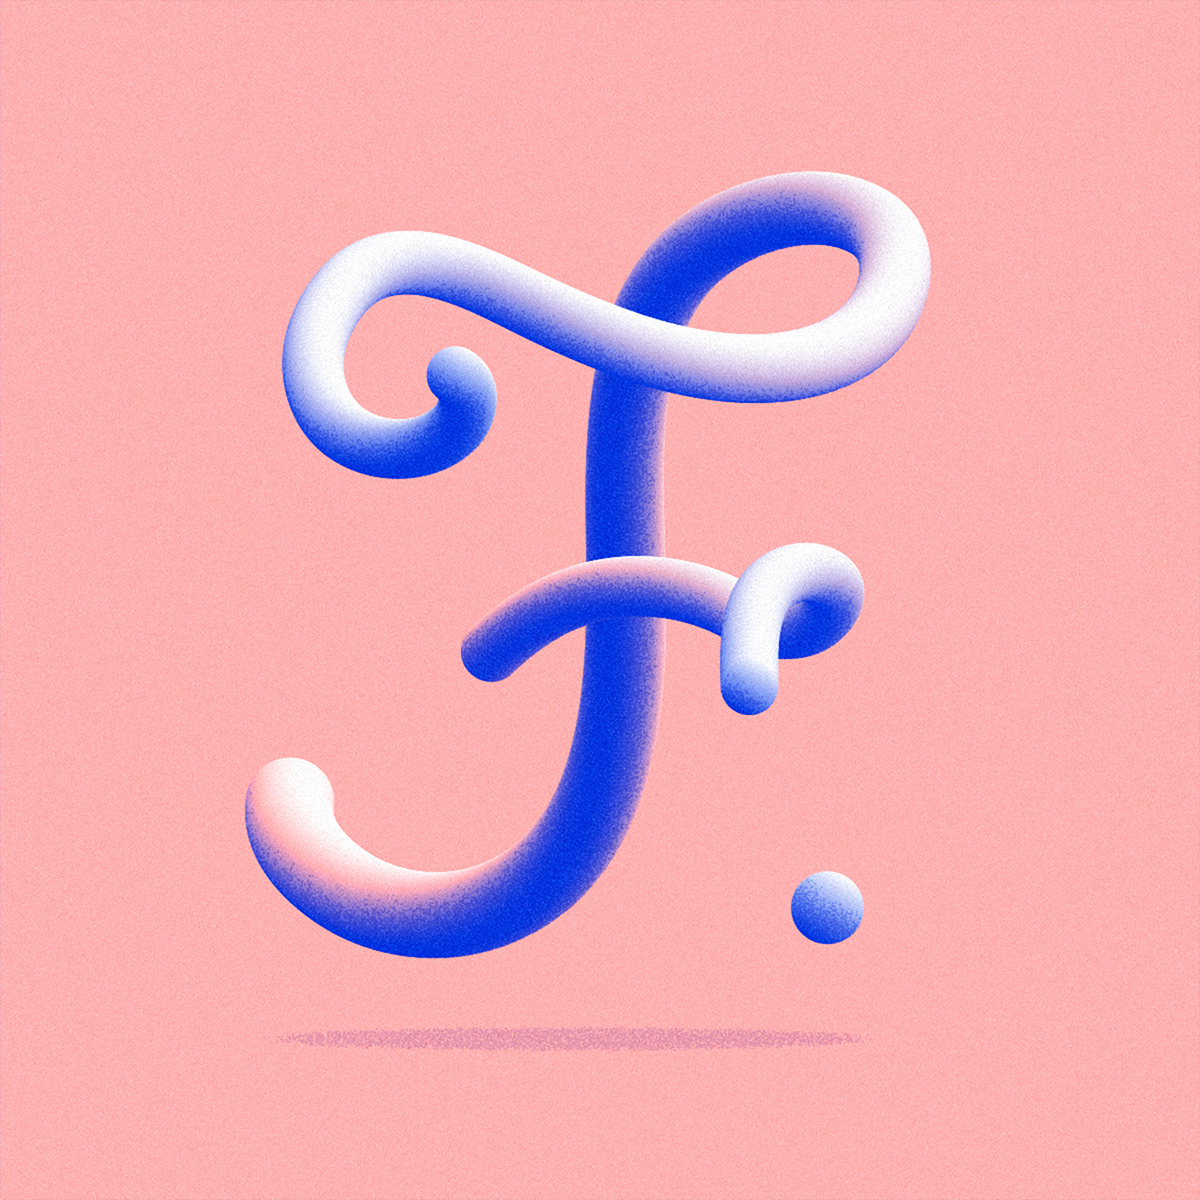 graphic design  Typeface typography   ILLUSTRATION  36daysoftype 36days type alphabet numbers letters